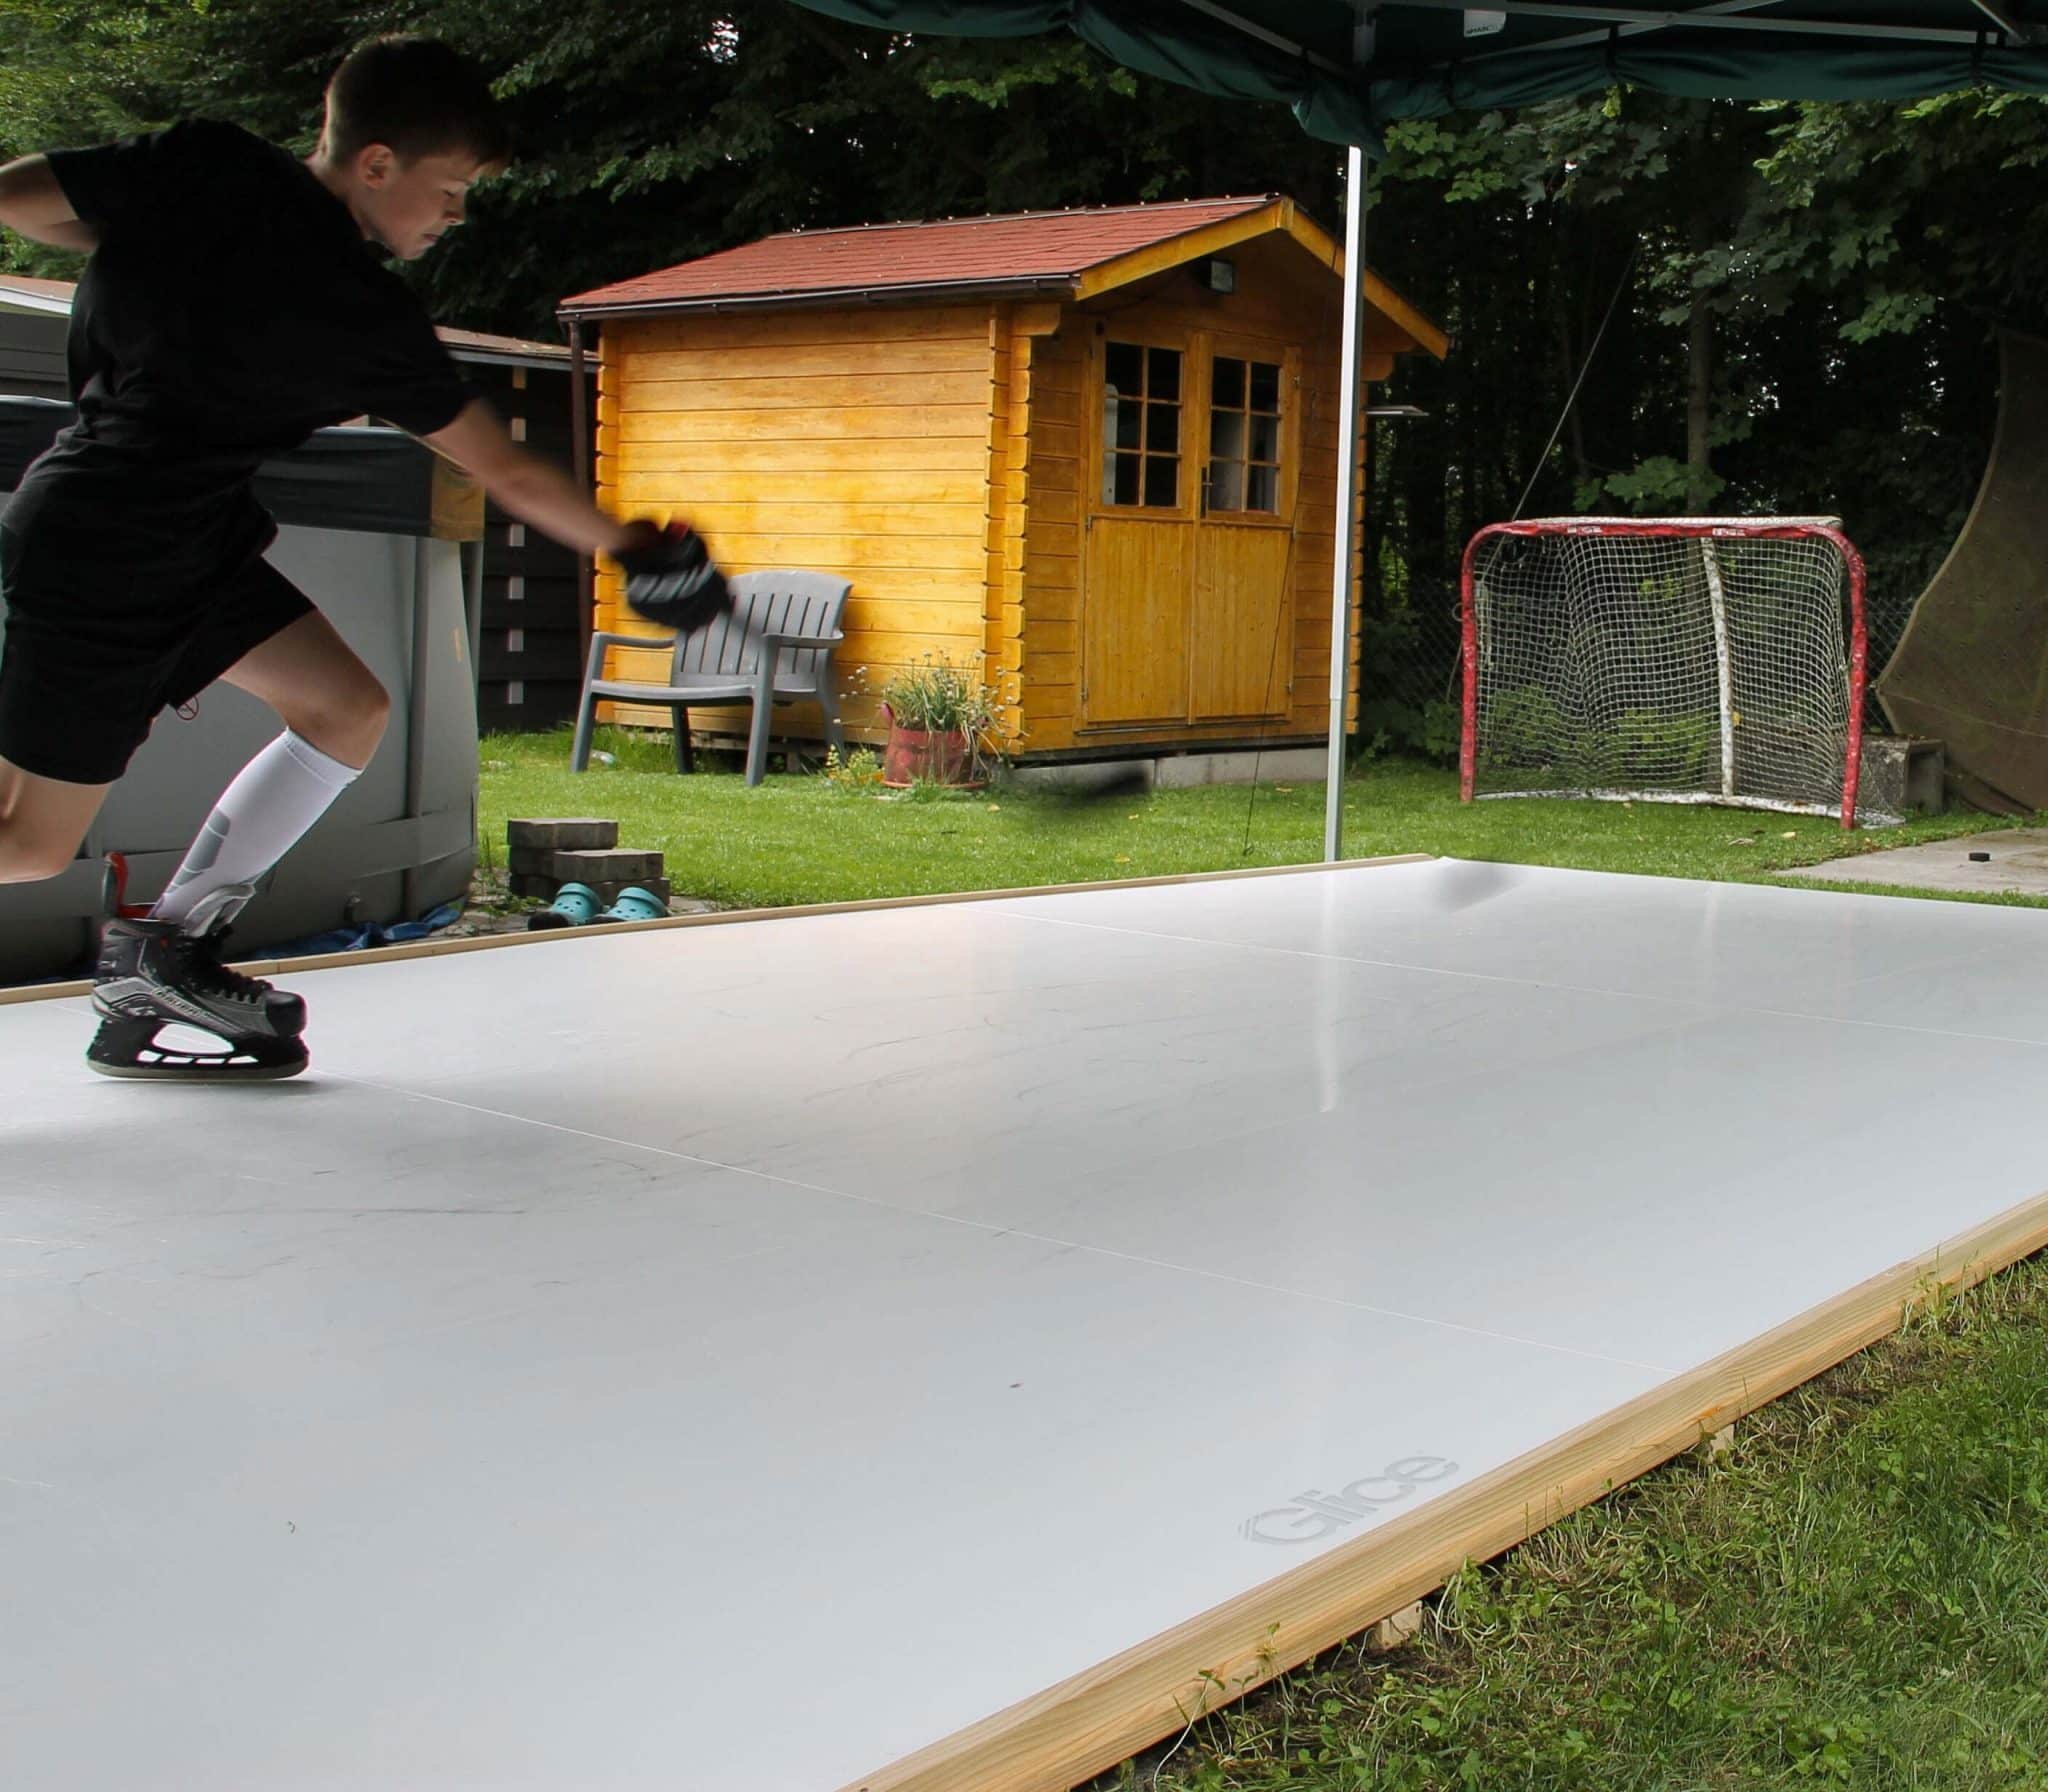 Child practicing on synthetic ice backyard pad